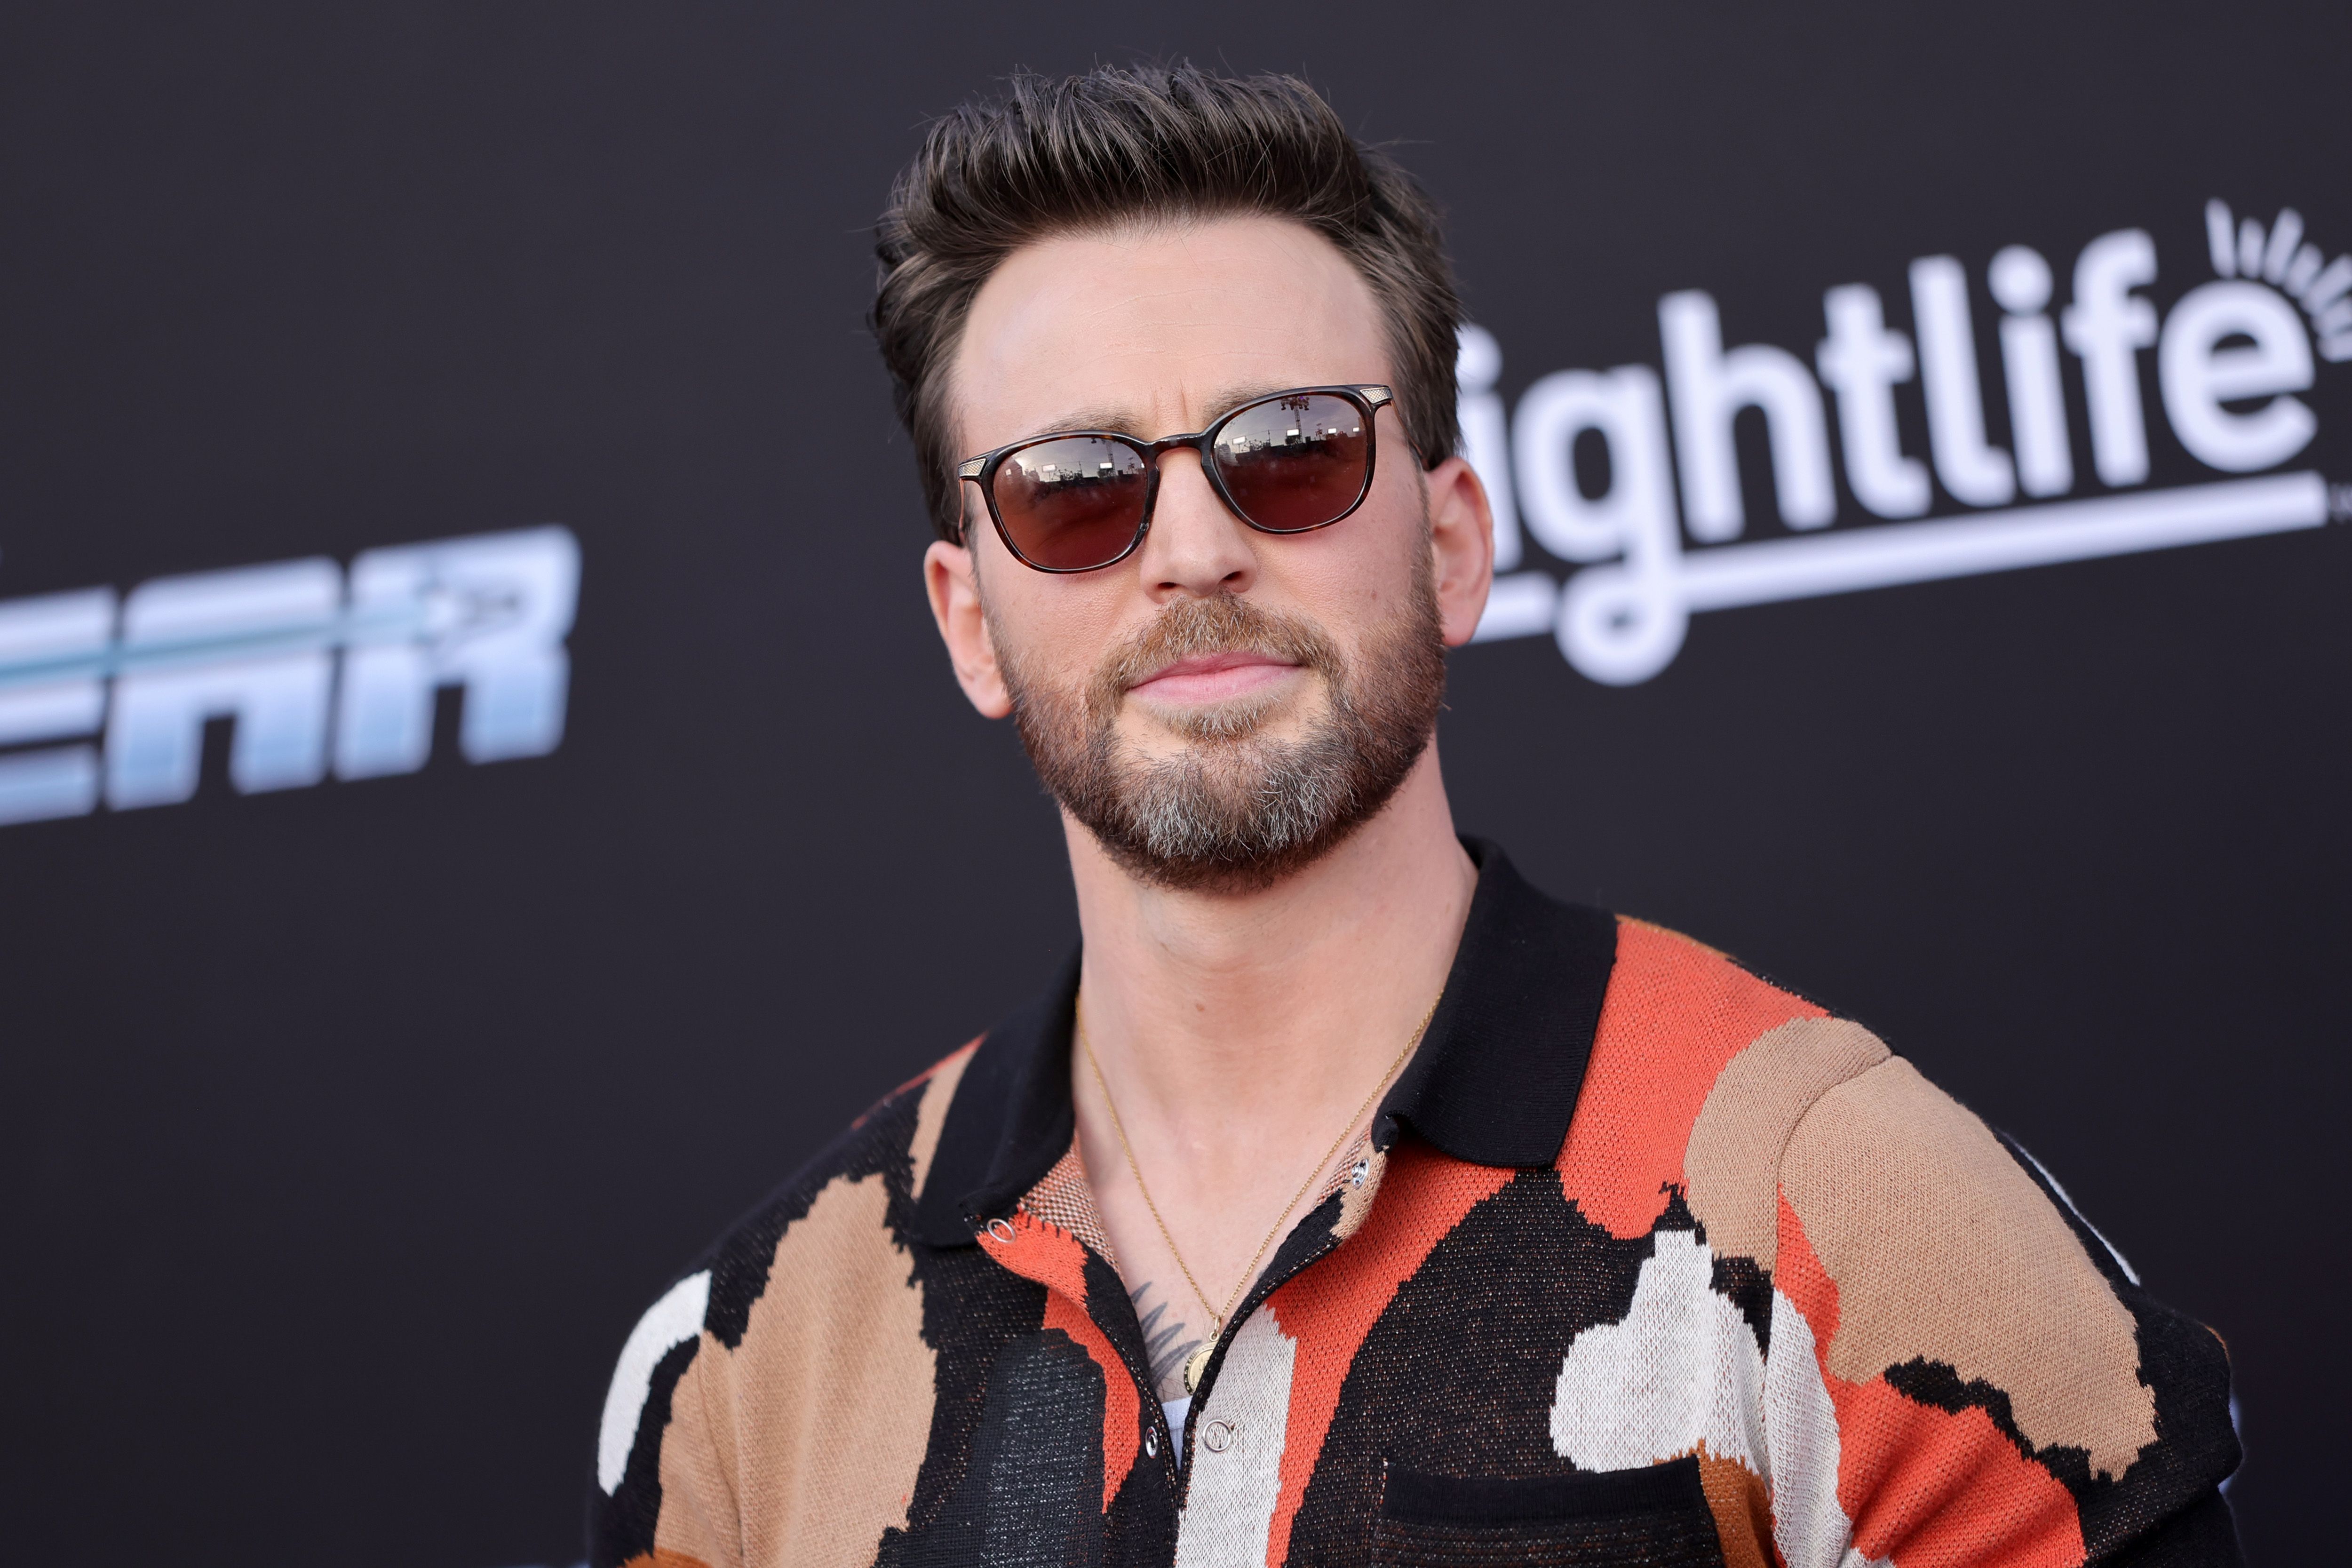 Chris Evans attends the Los Angeles premiere of Lightyear